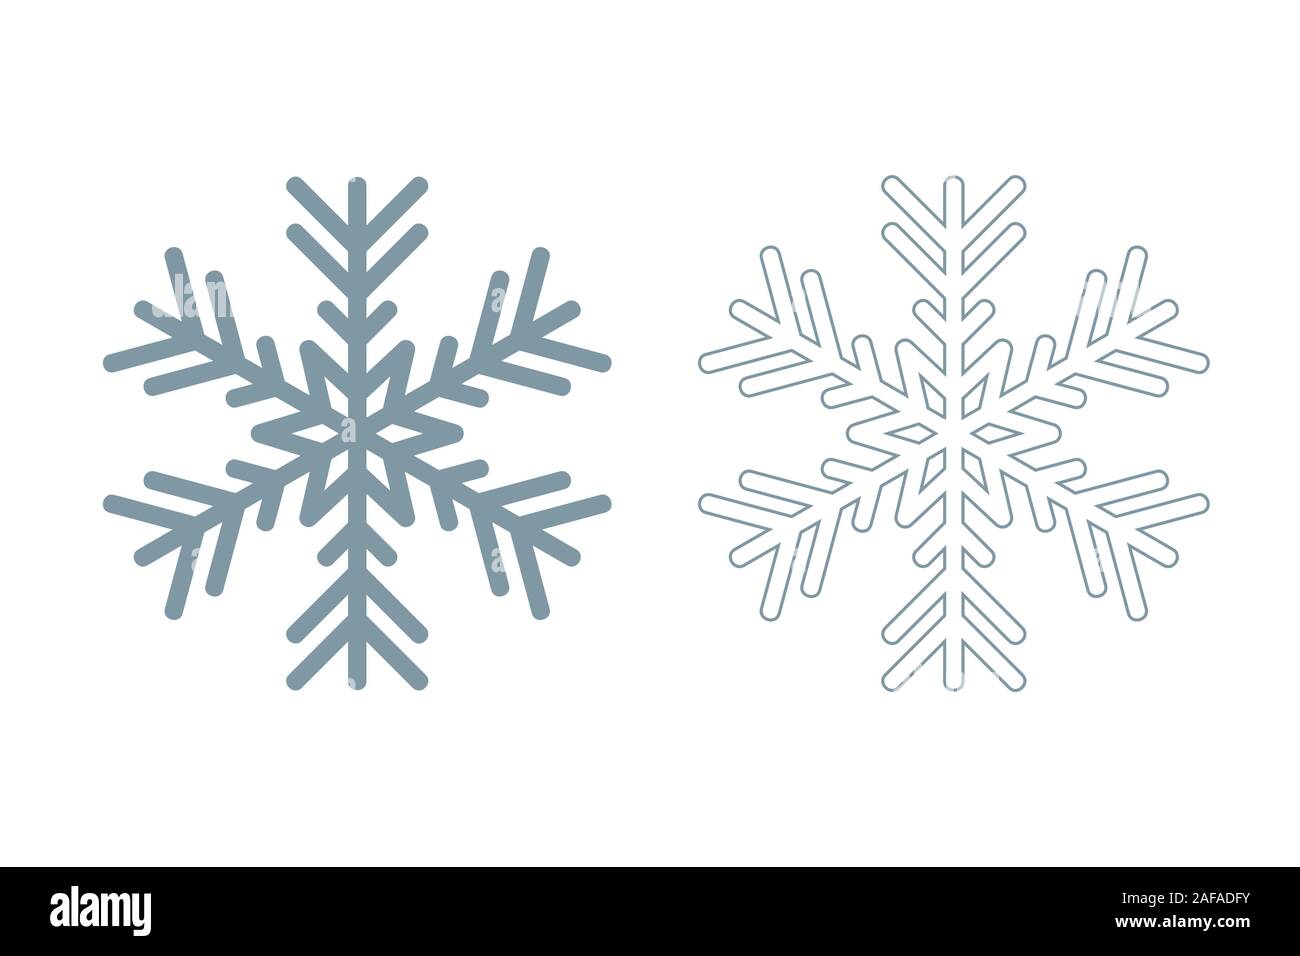 snowflake icon set isolated on white background vector illustration EPS10 Stock Vector